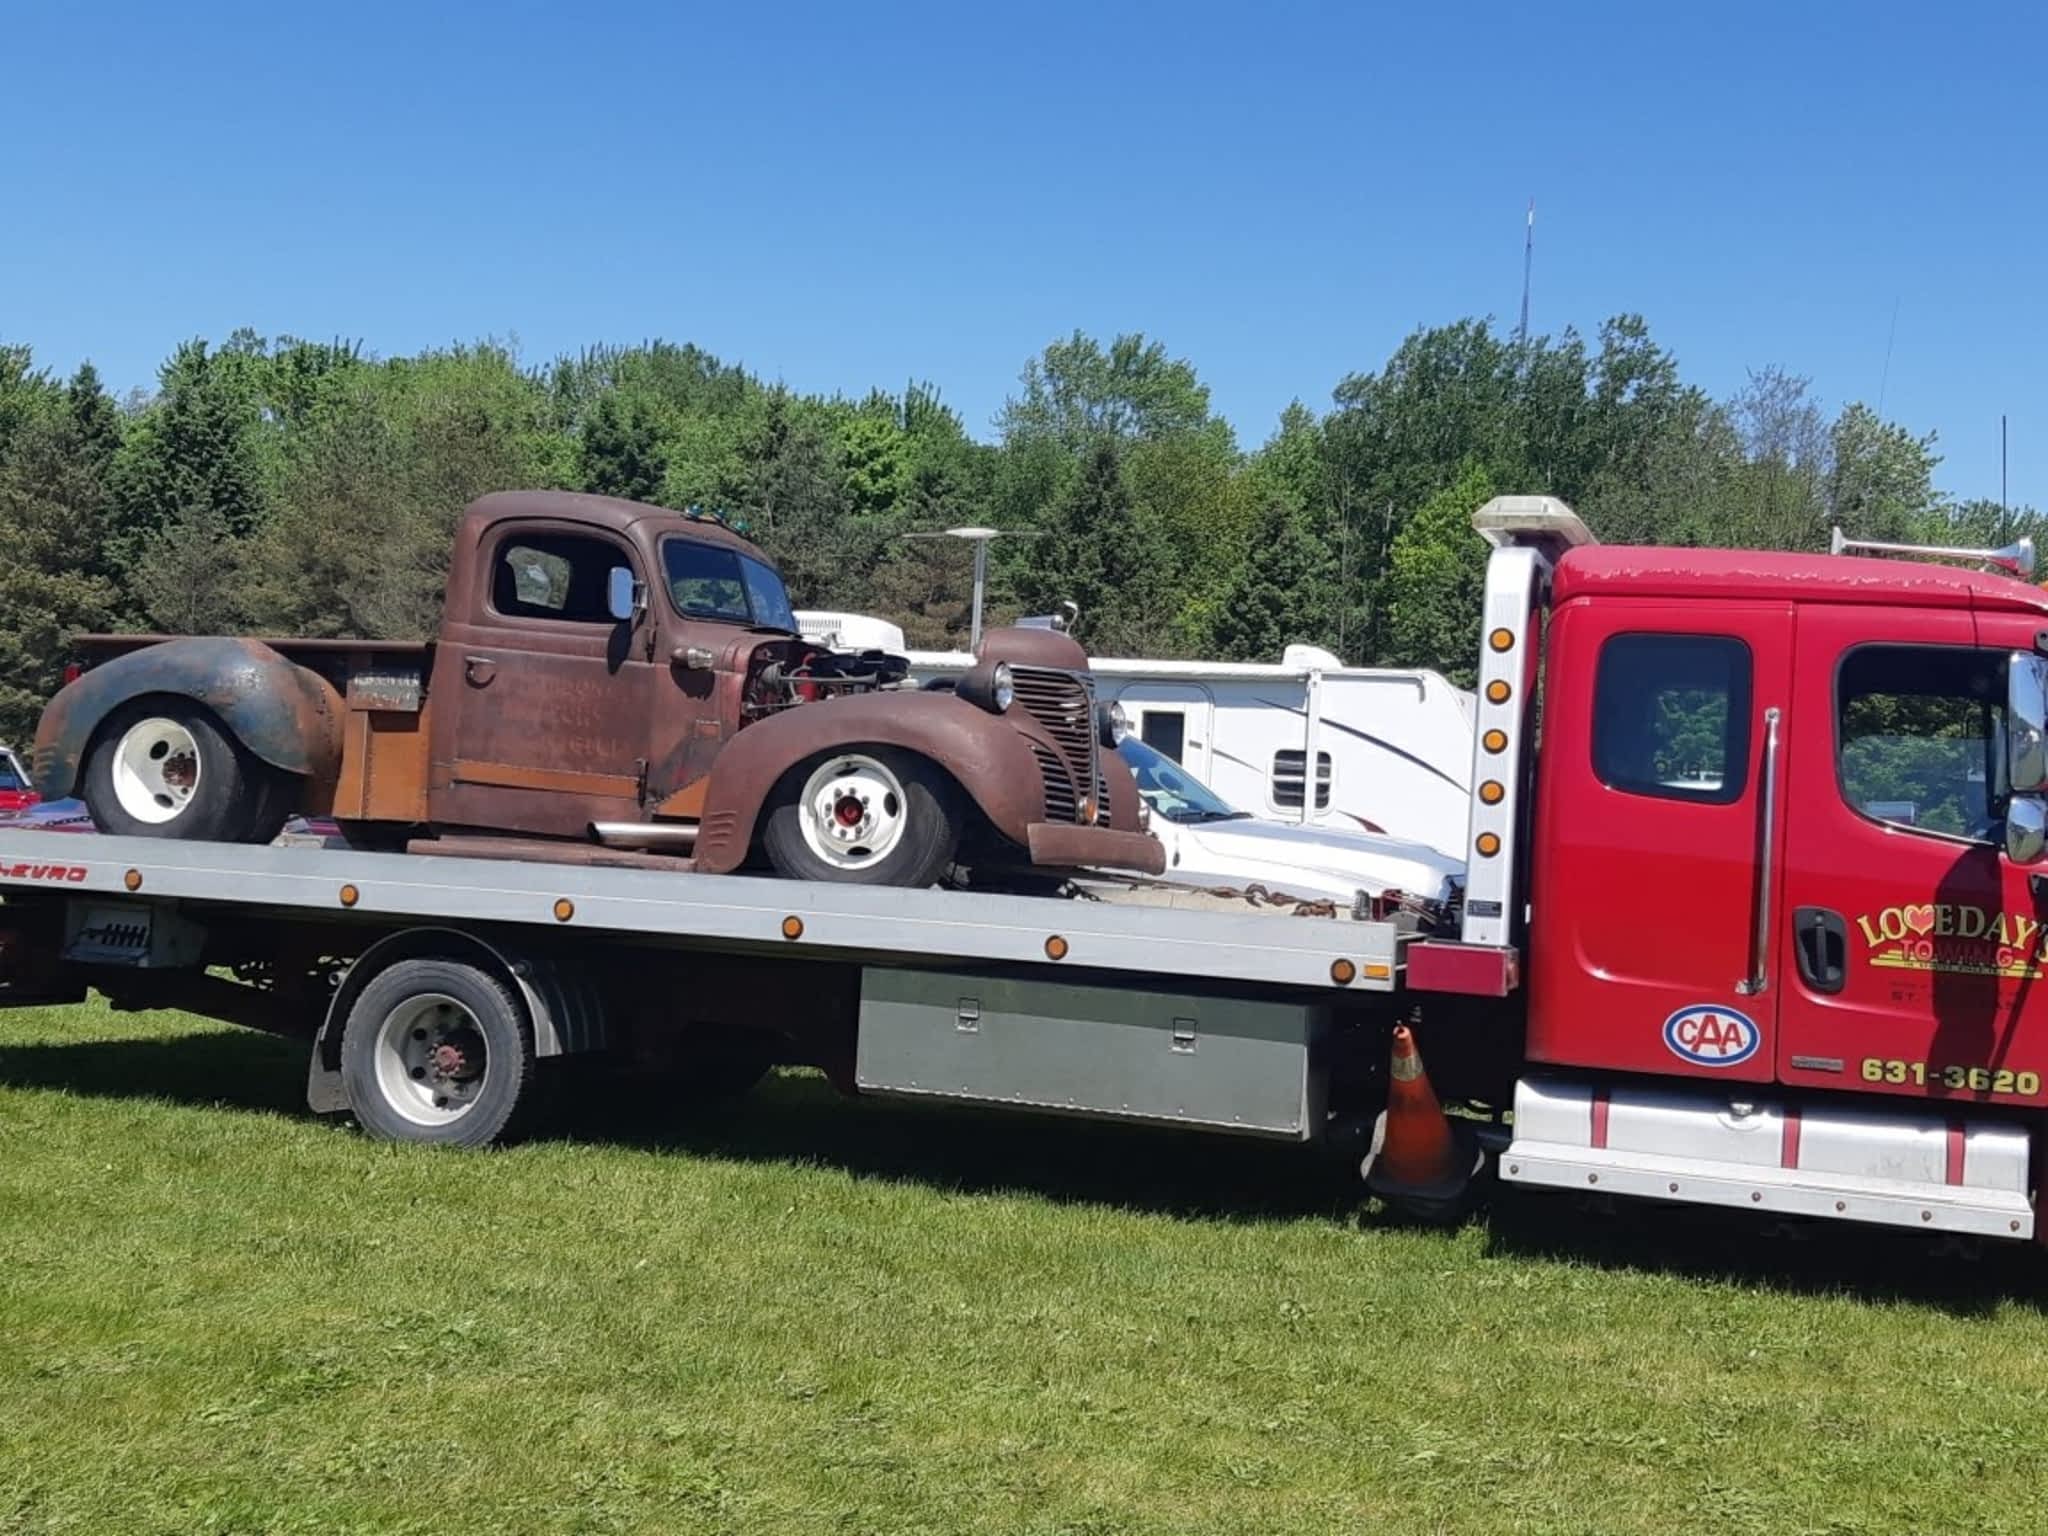 photo Loveday's Towing